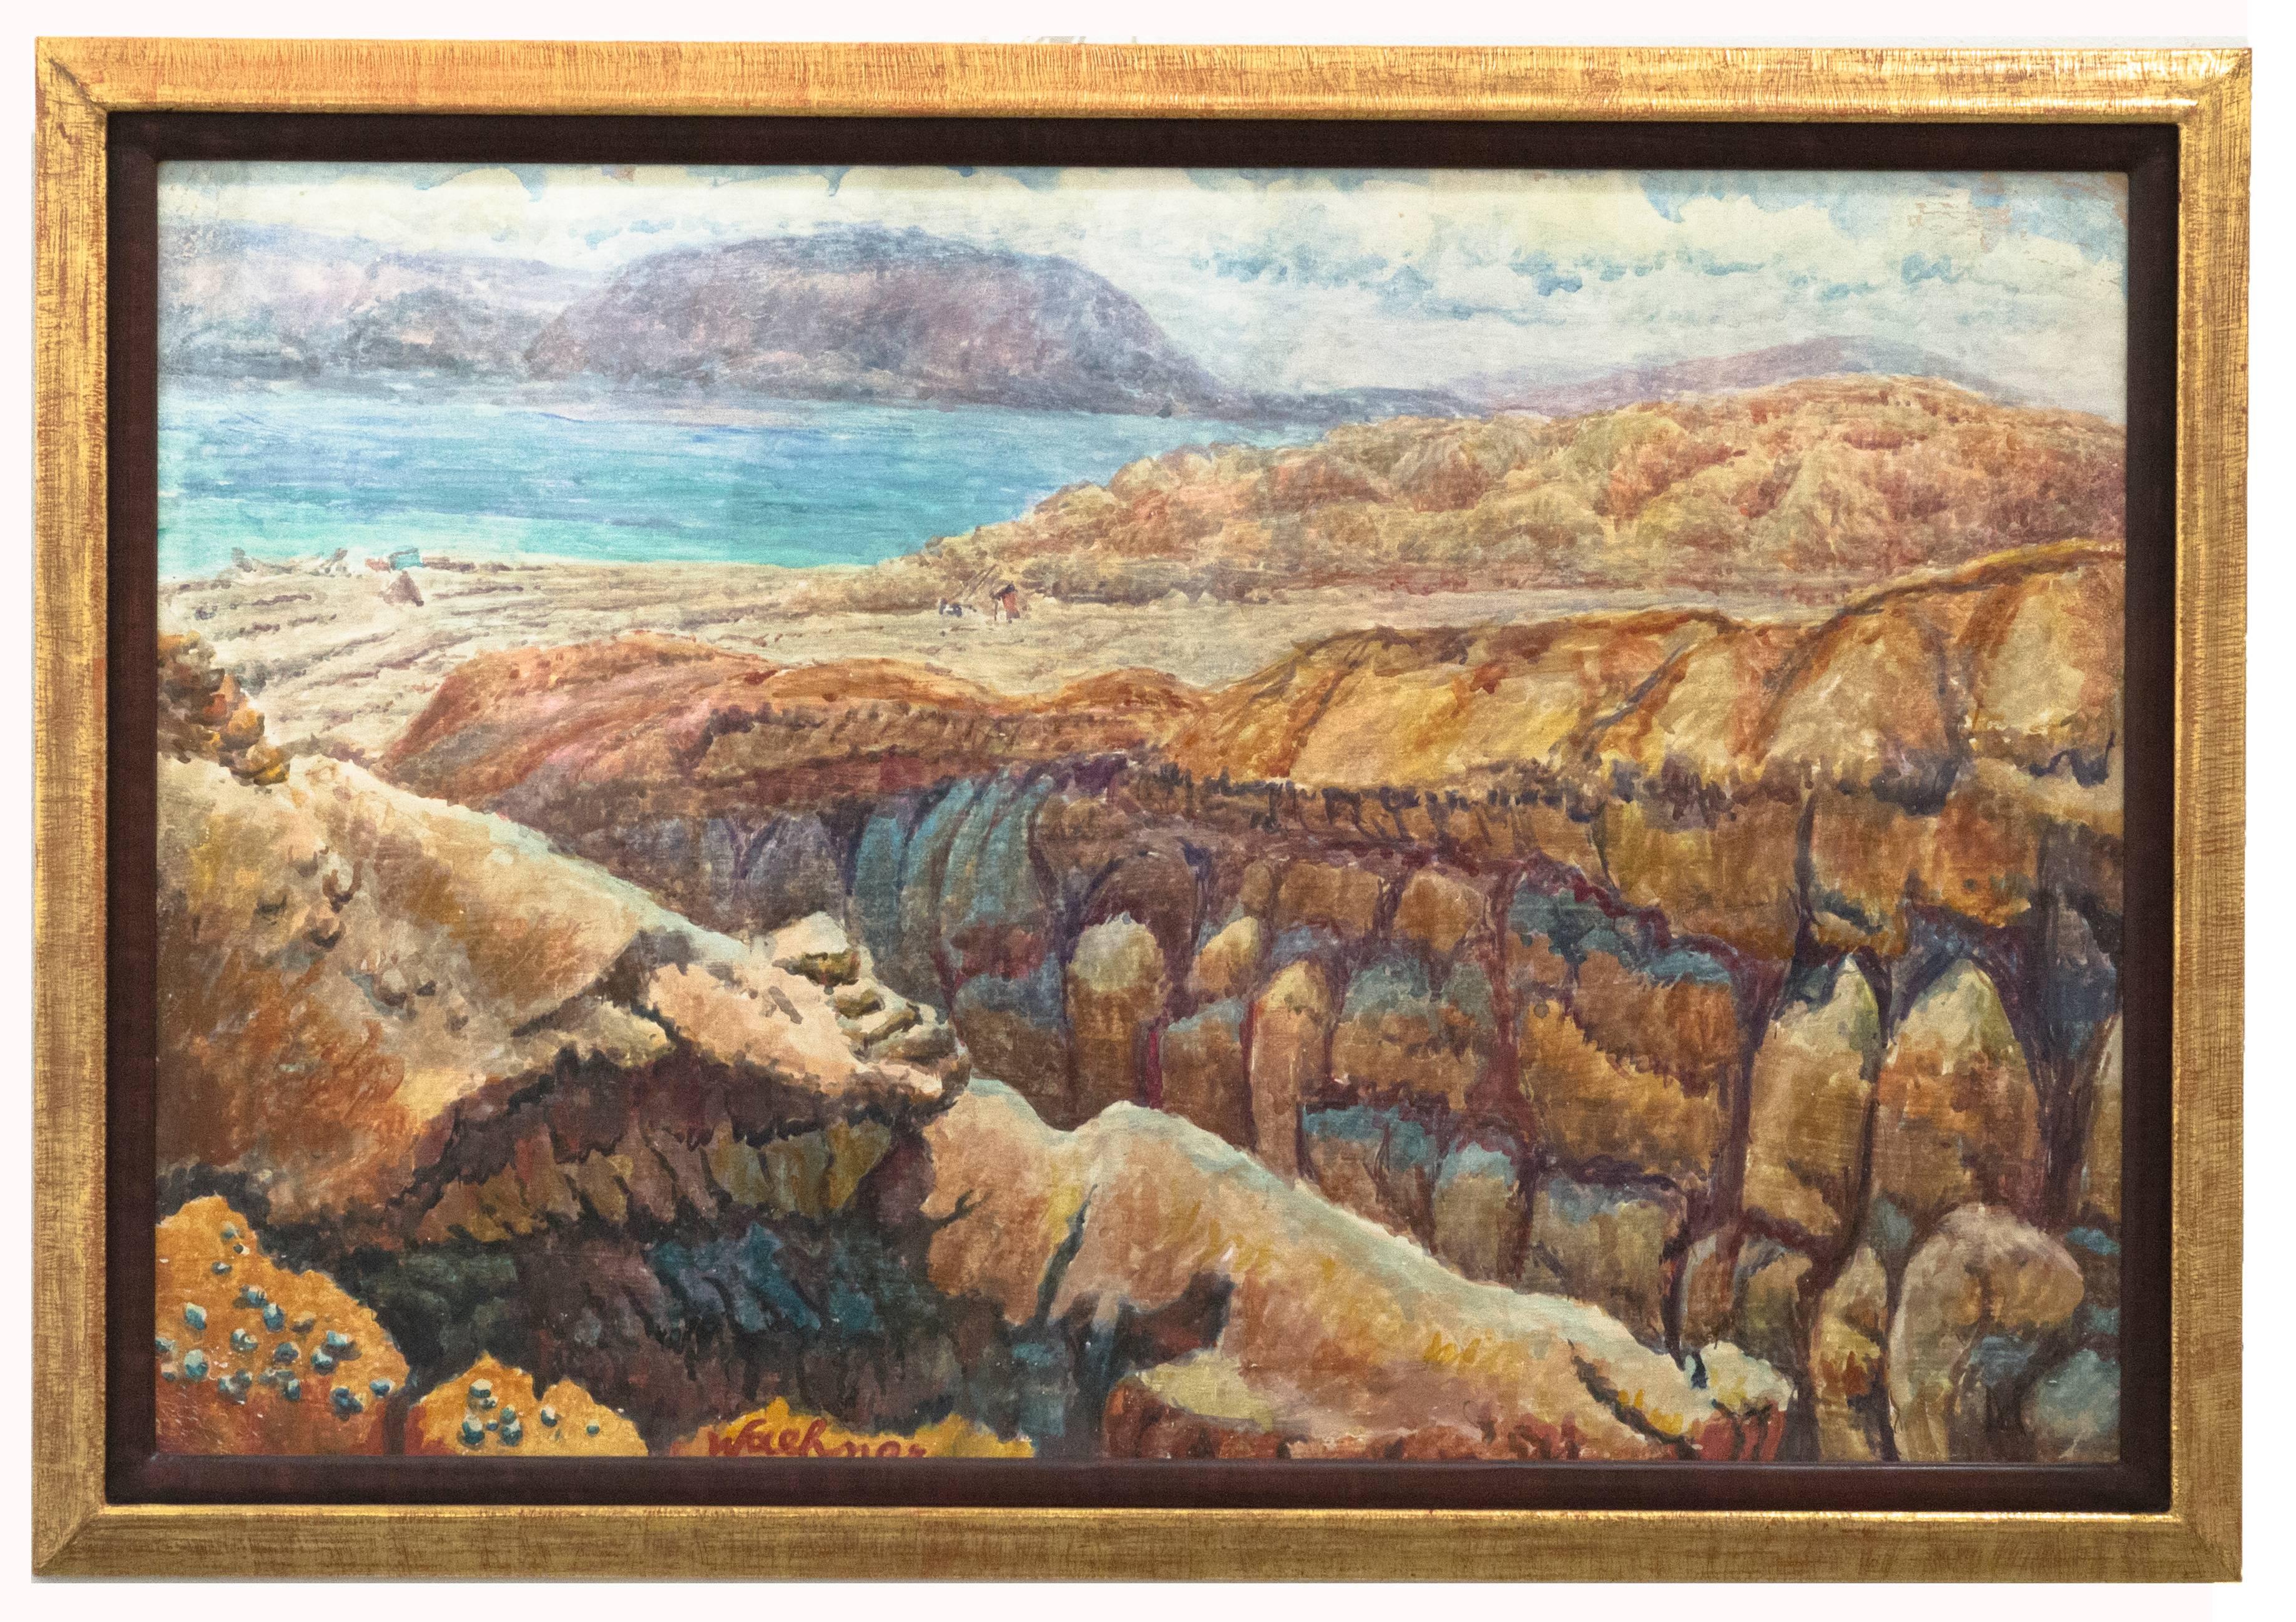 Canyon of the Dead Sea, 1960s - Mixed Media Art by Trude Waehner